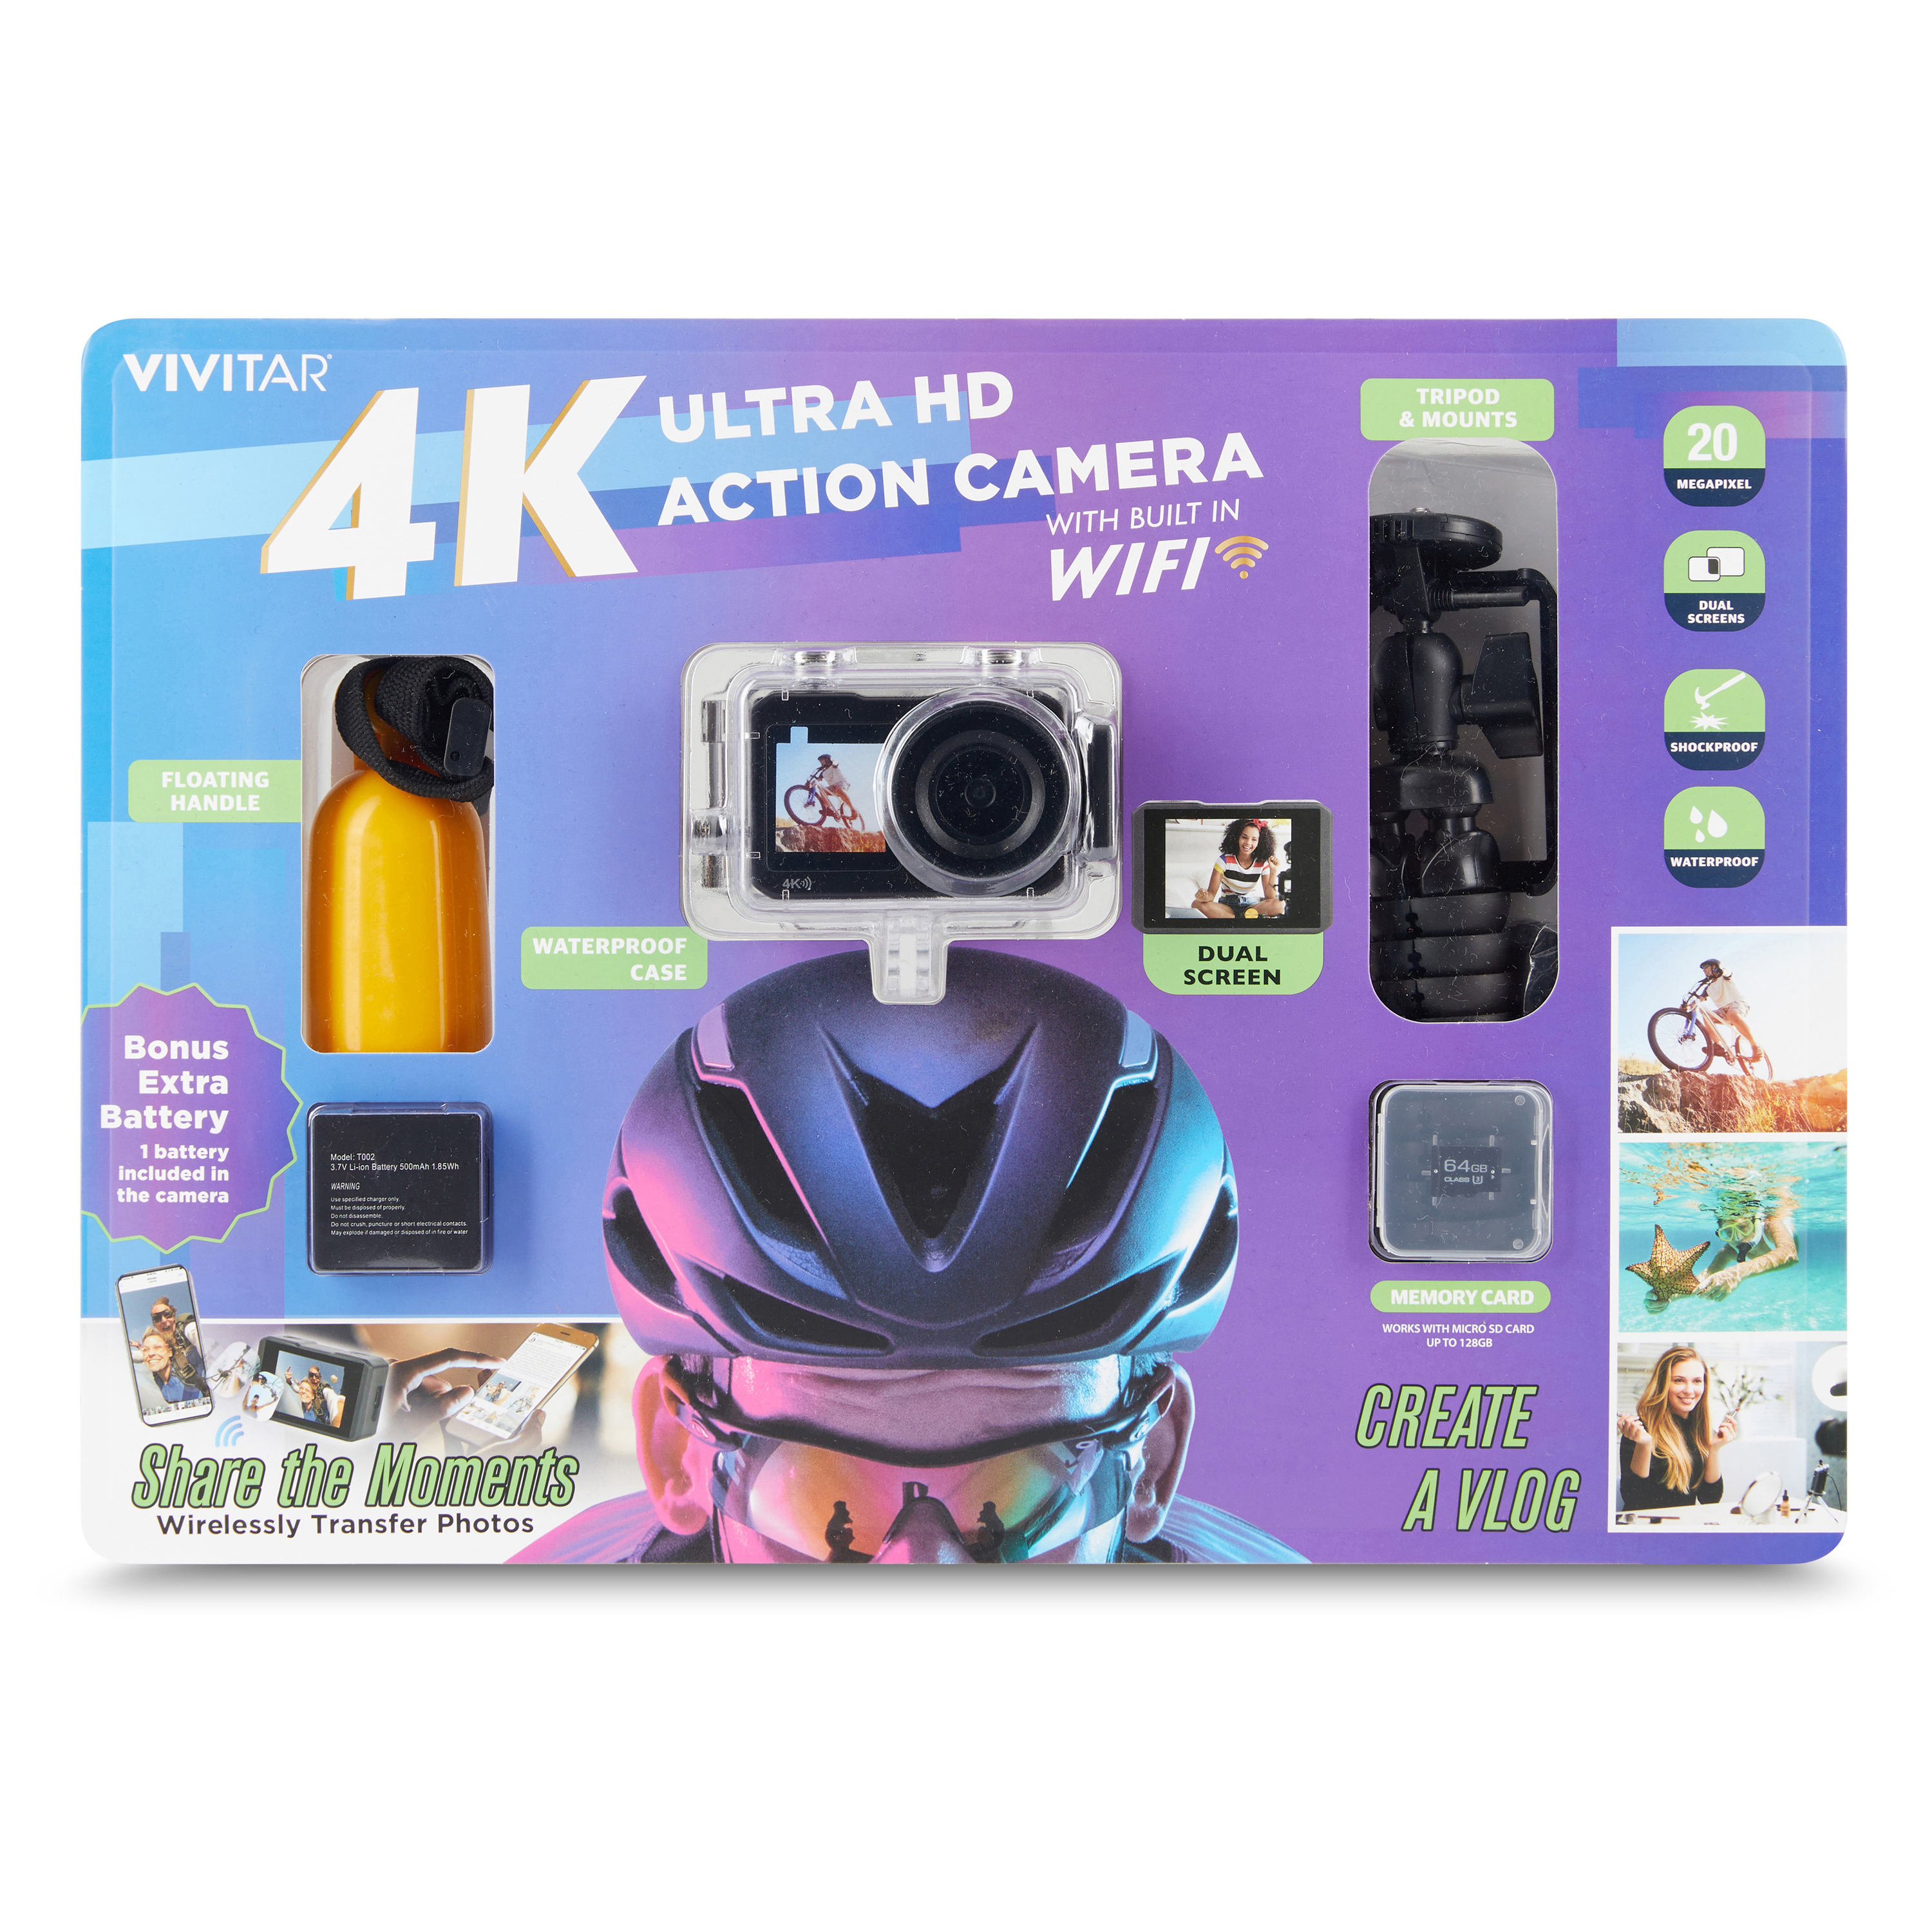 Vivitar 4K Ultra HD Action Camera Kit, Dual Screen with Wifi, Bonus Battery, Includes SD Card, Floating Handle, Tripod, Mounts - image 1 of 15